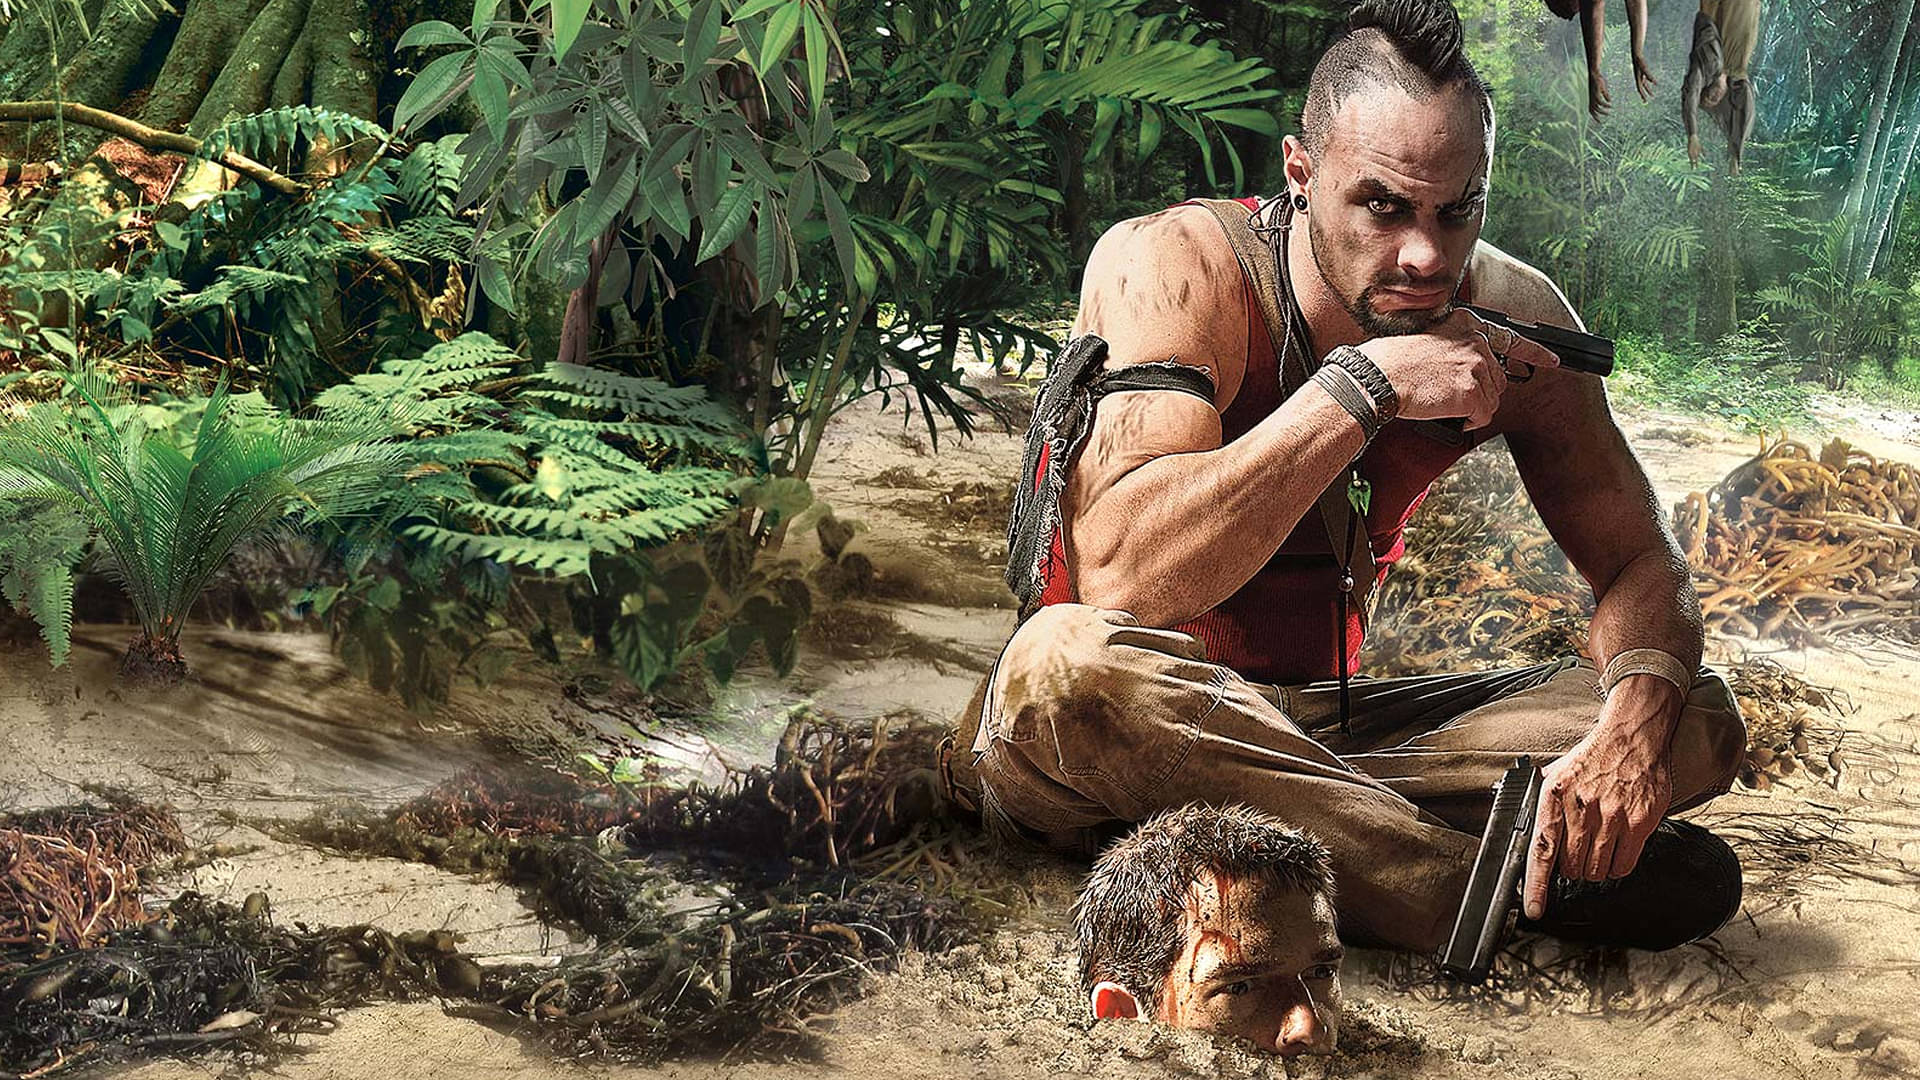 Far Cry 3 is one of the best story games on Steam